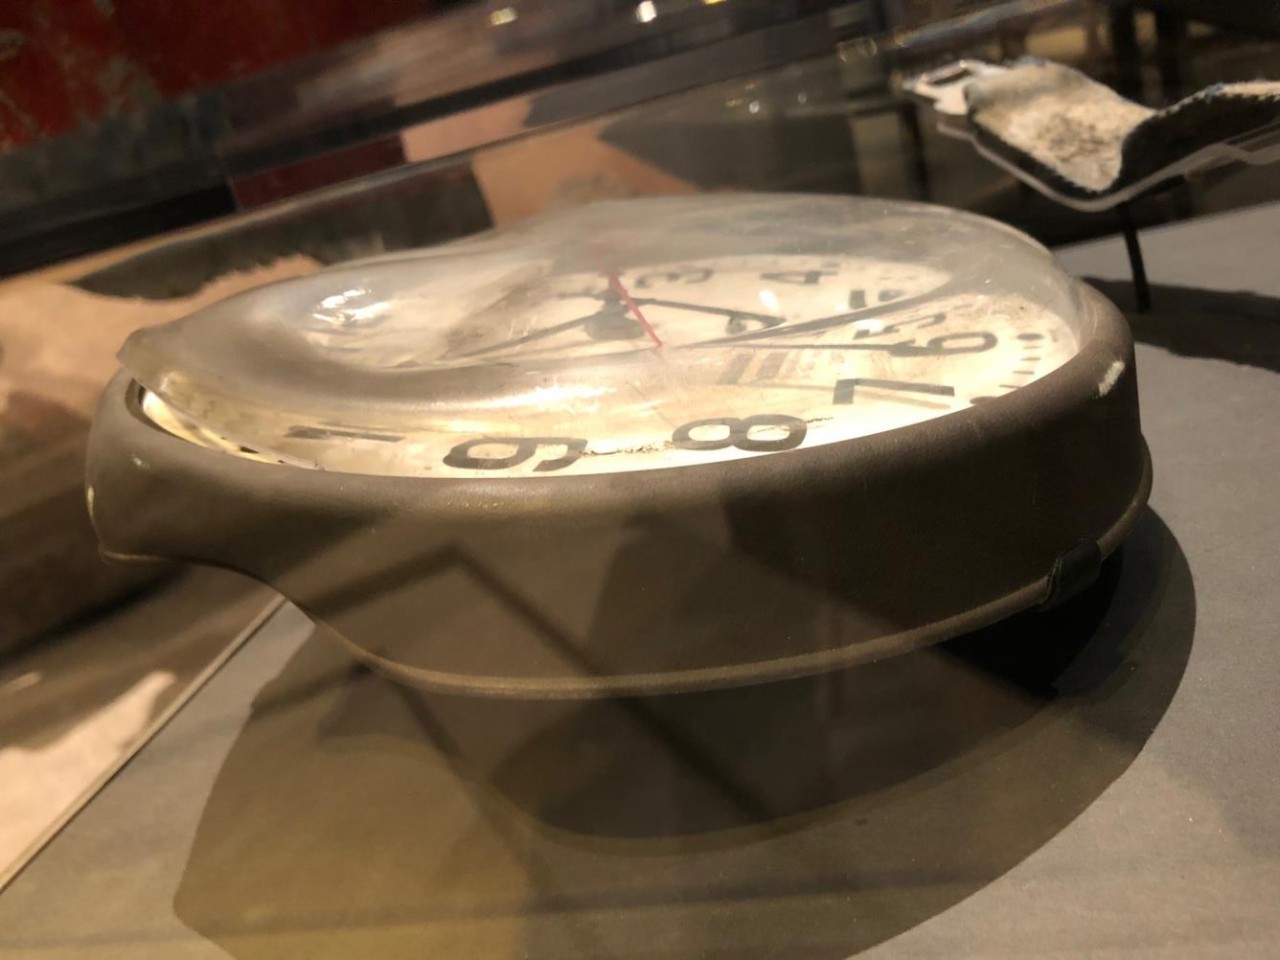 Profile view of 12-hour clock with white face and black numbers. Clear plastic cover blackened and warped from intense heat. Recovered from Pentagon after terrorist attack.